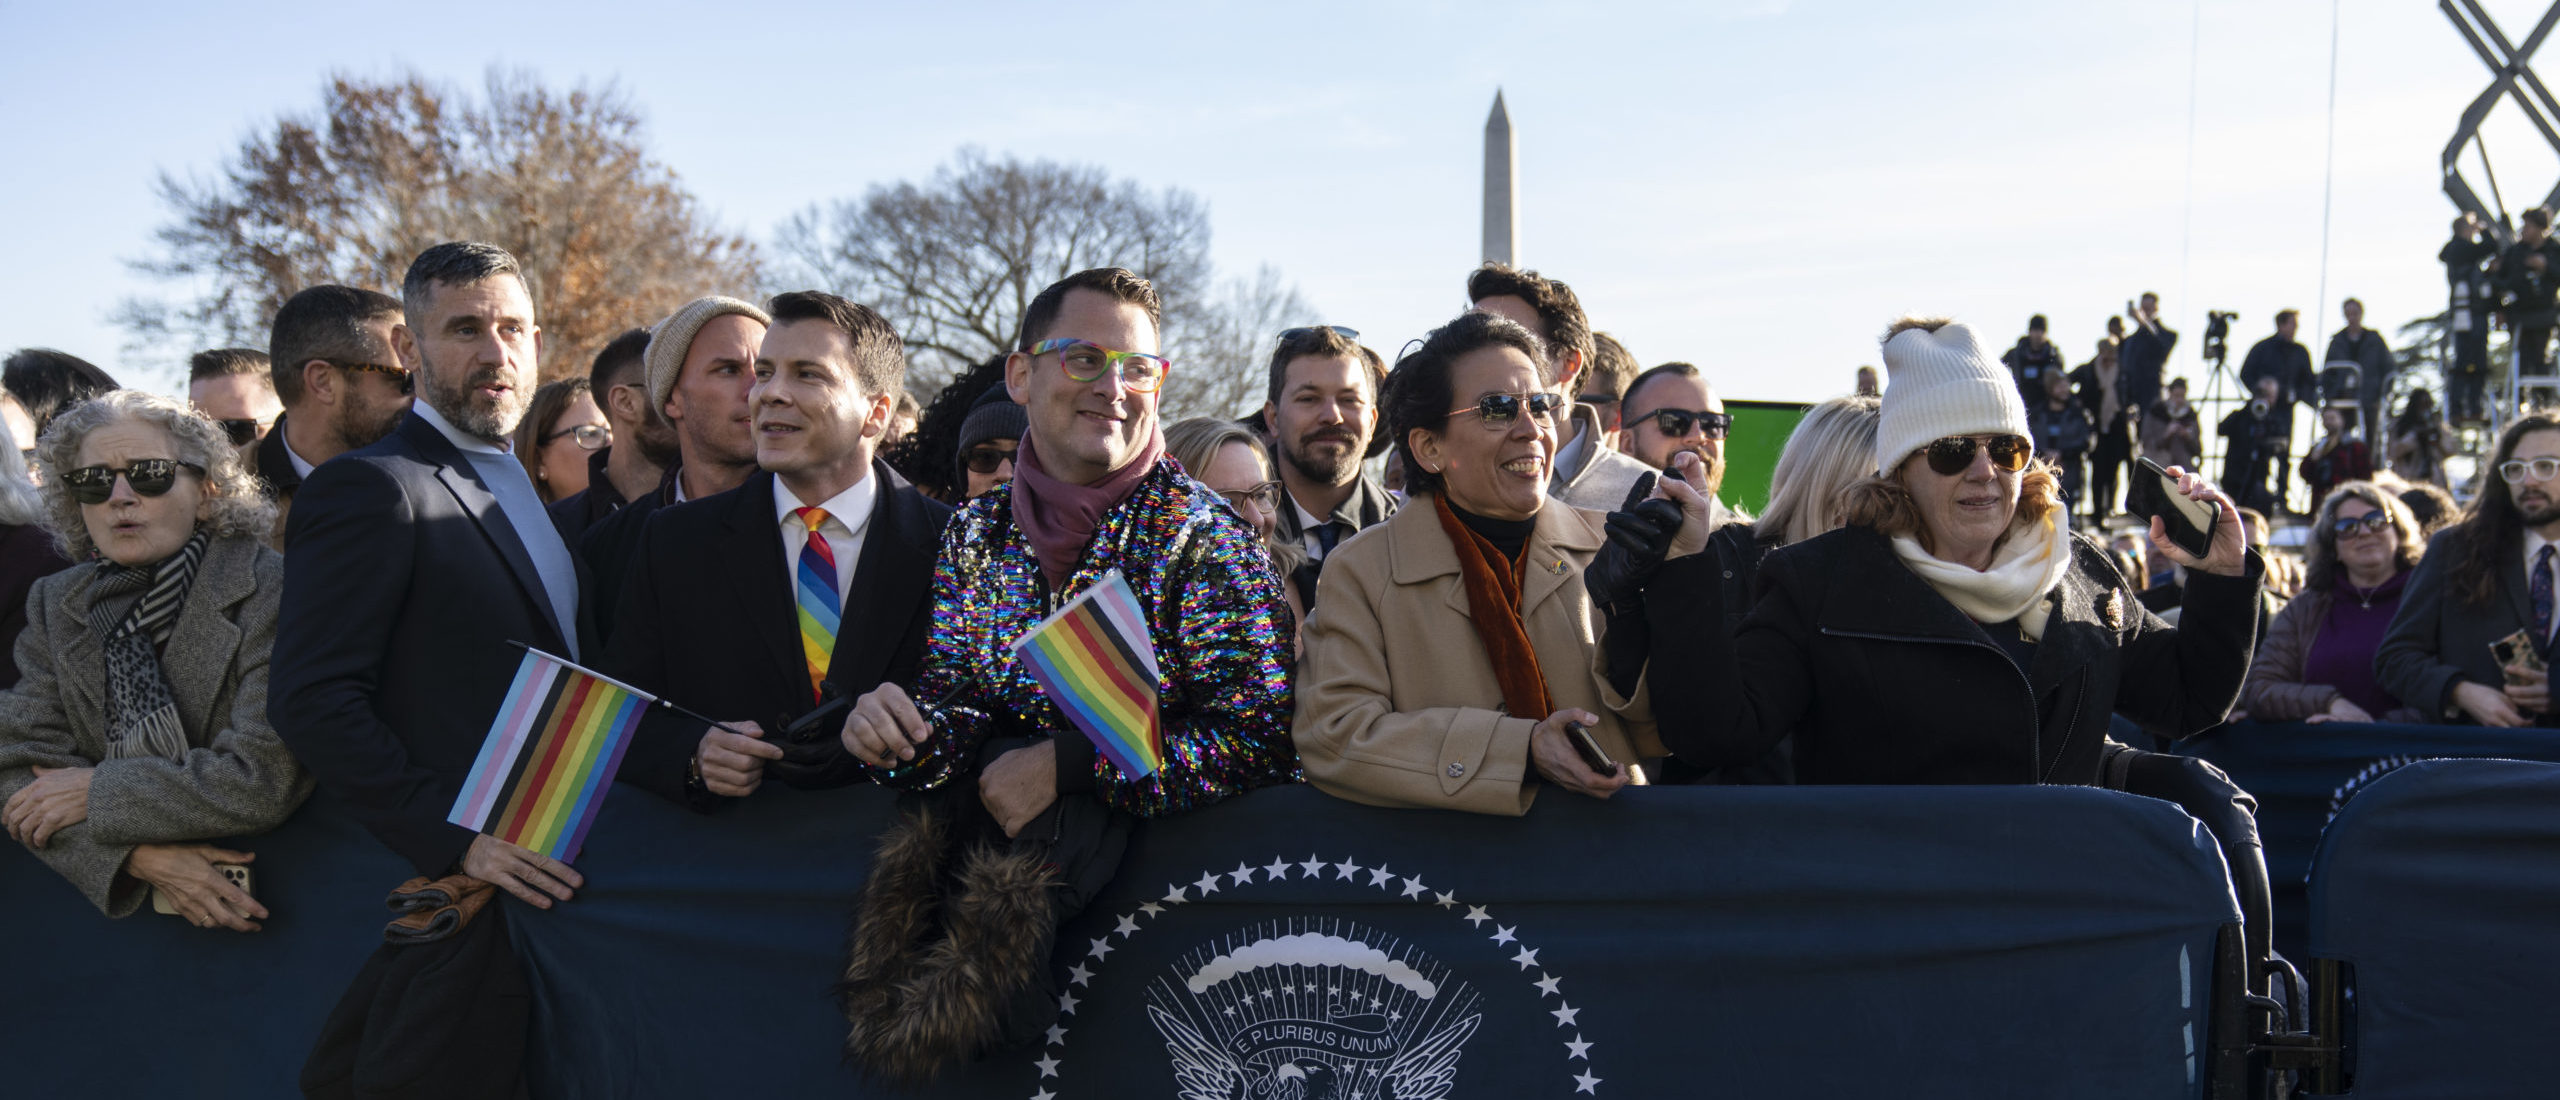 WASHINGTON, DC - DECEMBER 13: People attend a bill signing ceremony for the Respect for Marriage Act on the South Lawn of the White House December 13, 2022 in Washington, DC. The Respect for Marriage Act will codify same-sex and interracial marriages. (Photo by Drew Angerer/Getty Images)